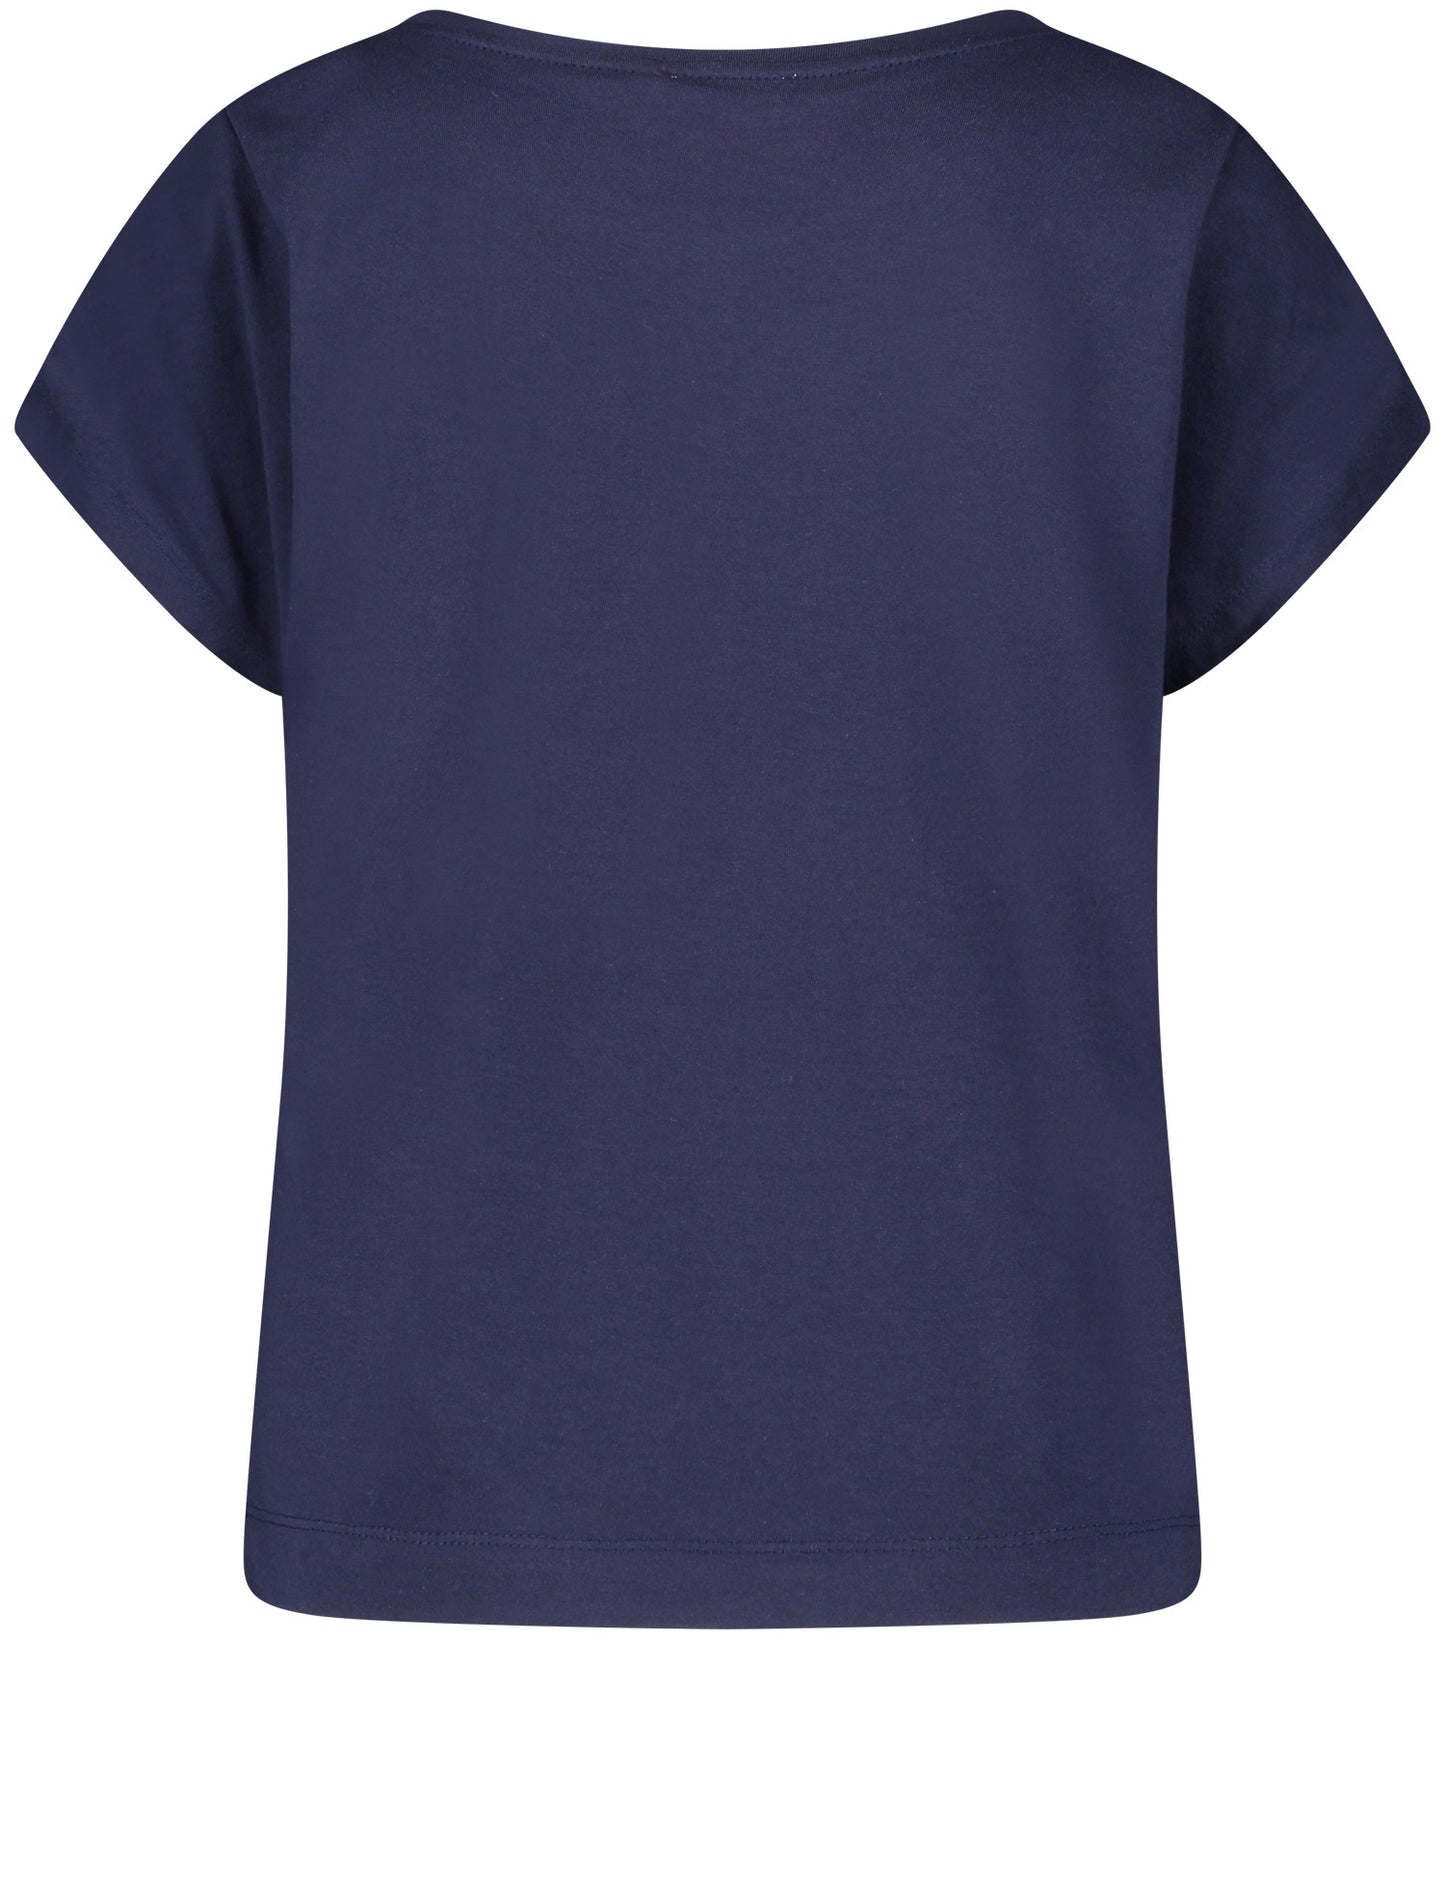 Short-sleeved shirt with gathered sleeves